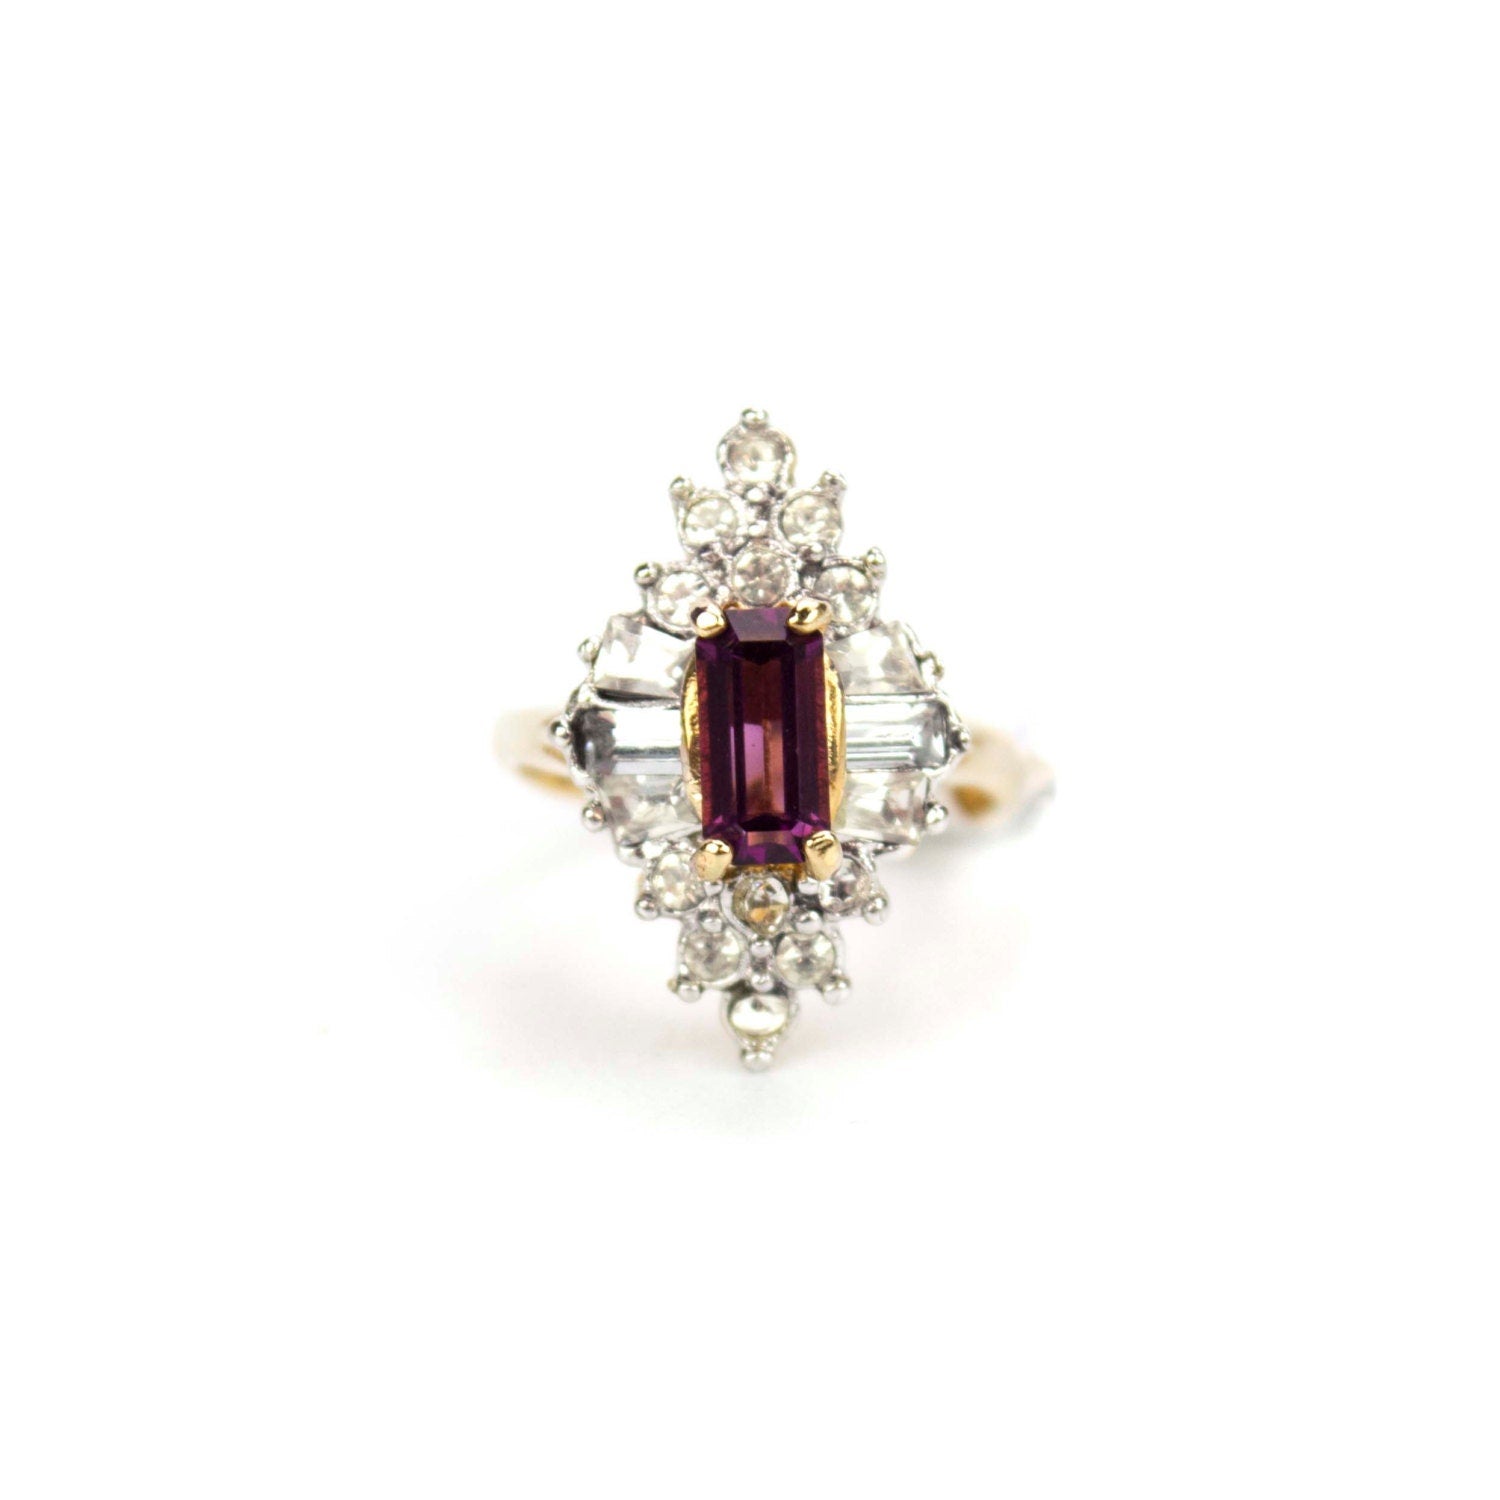 Vintage Ring 1970s Ring Amethyst and Clear Swarovski Crystals 18k Gold Plated Band #R2001 - Limited Stock - Never Worn